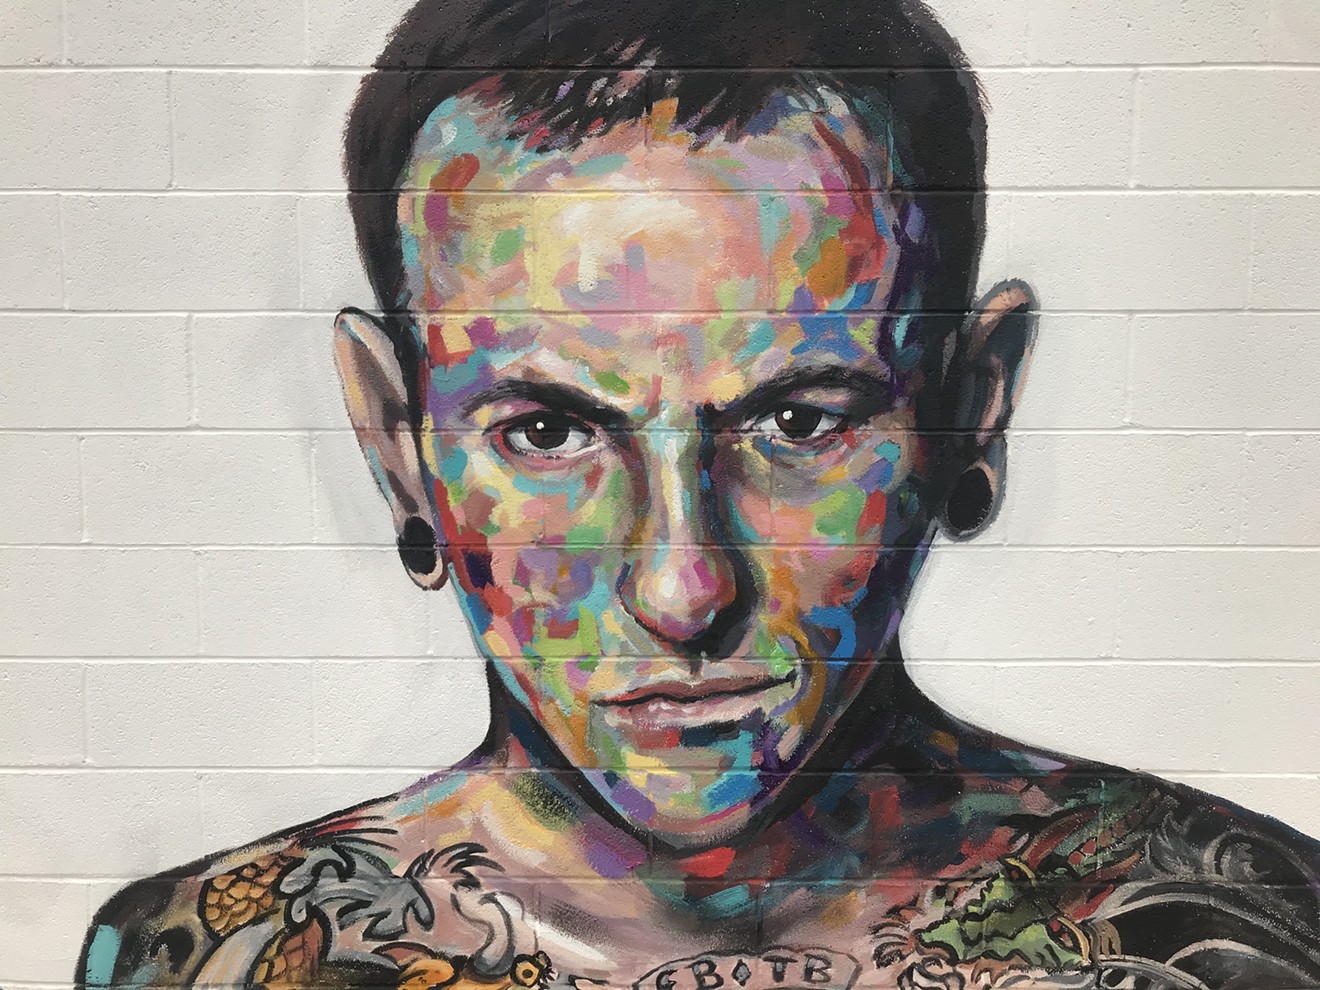 Valley Rockstar Memorial in Tempe includes this Chester Bennington portrait by Gina Ribaudo.